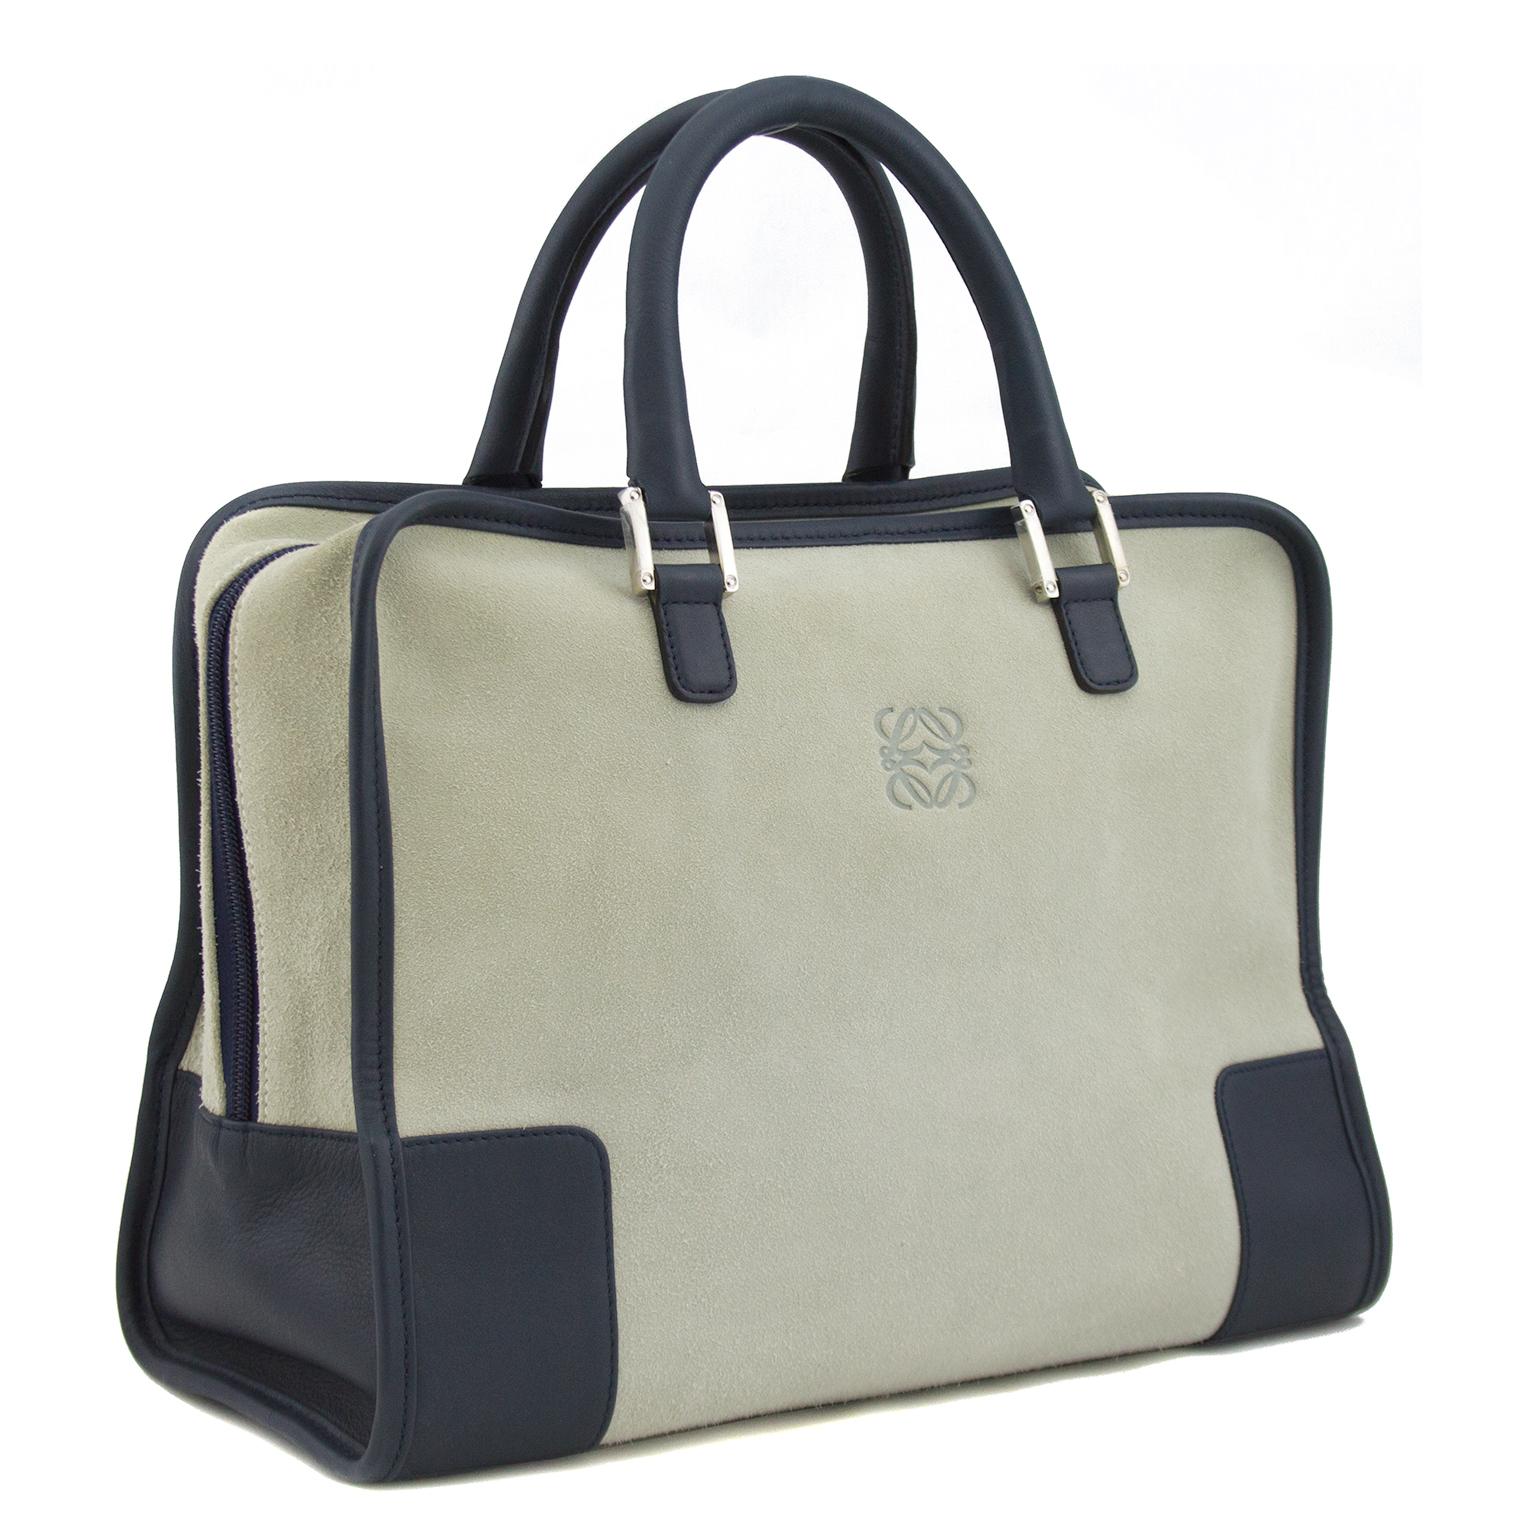 This authentic Loewe Amazona bag is crafted in greige suede with navy leather trim. A precursor to the This bag features dual-rolled leather handles, stamped logo at front, protective base studs and silver-tone hardware. Its zip closure opens to a